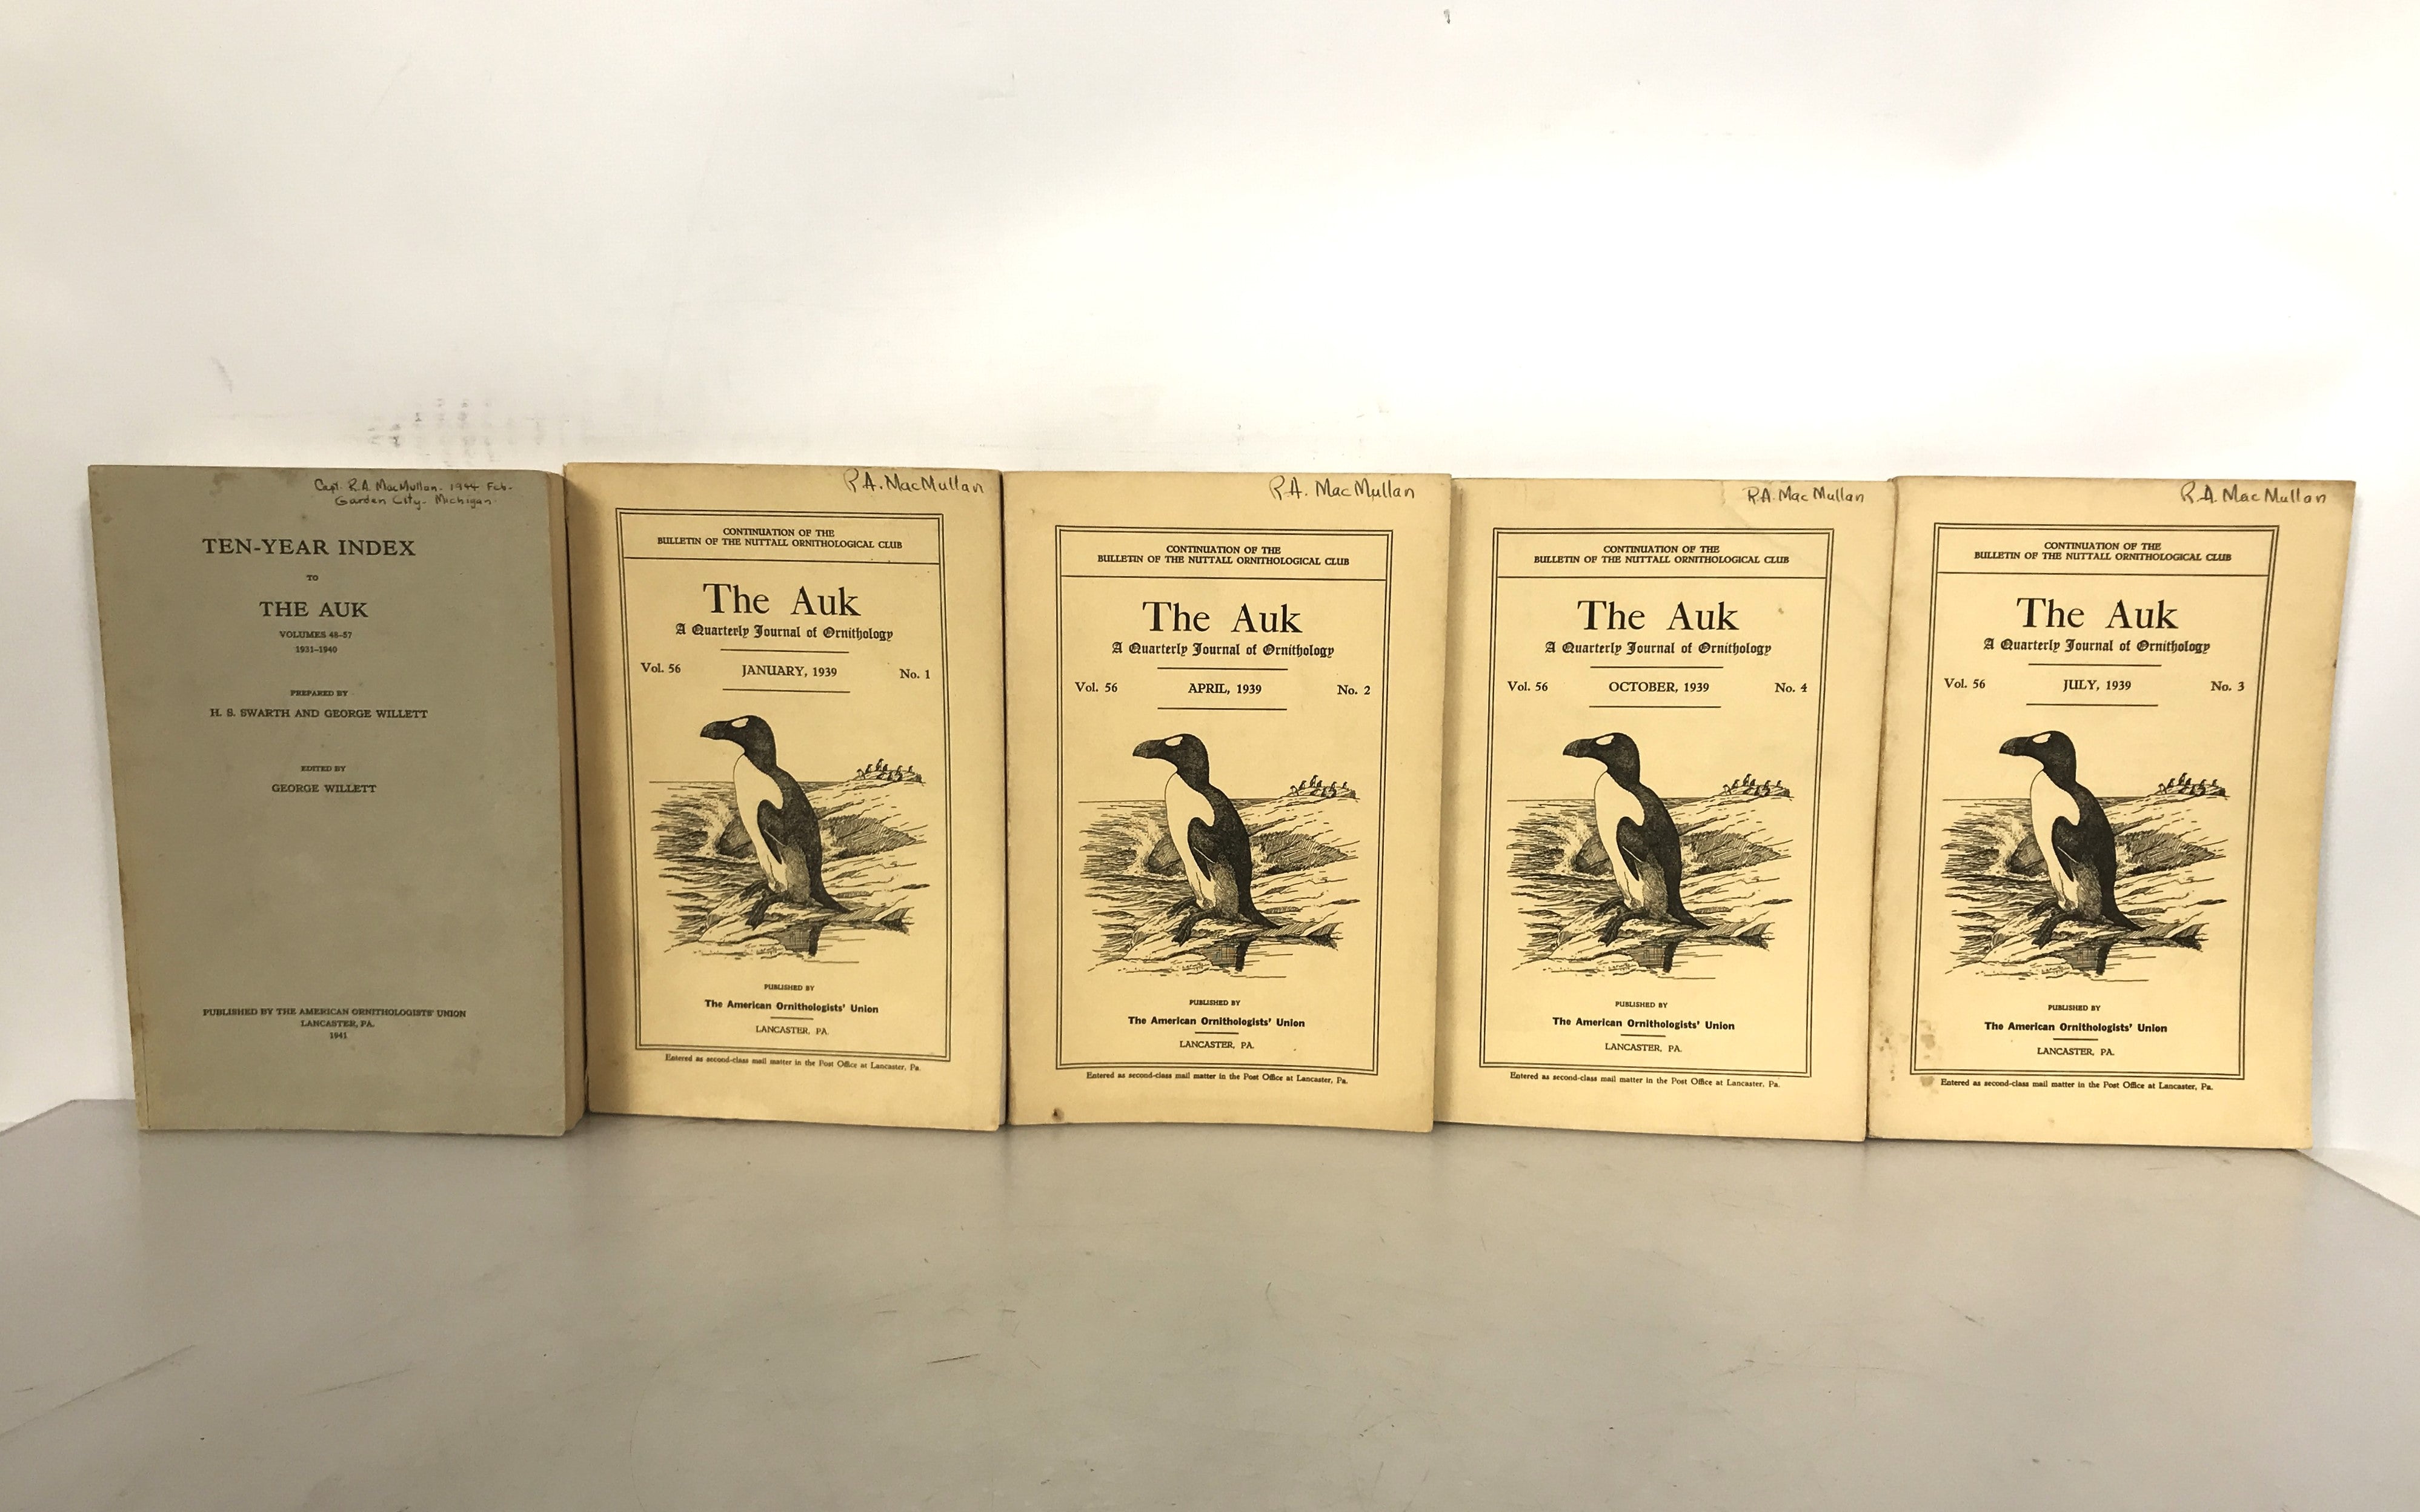 Lot of 5 The Auk Quarterly Journal of Ornithology Complete 1939 and 10 Year Index